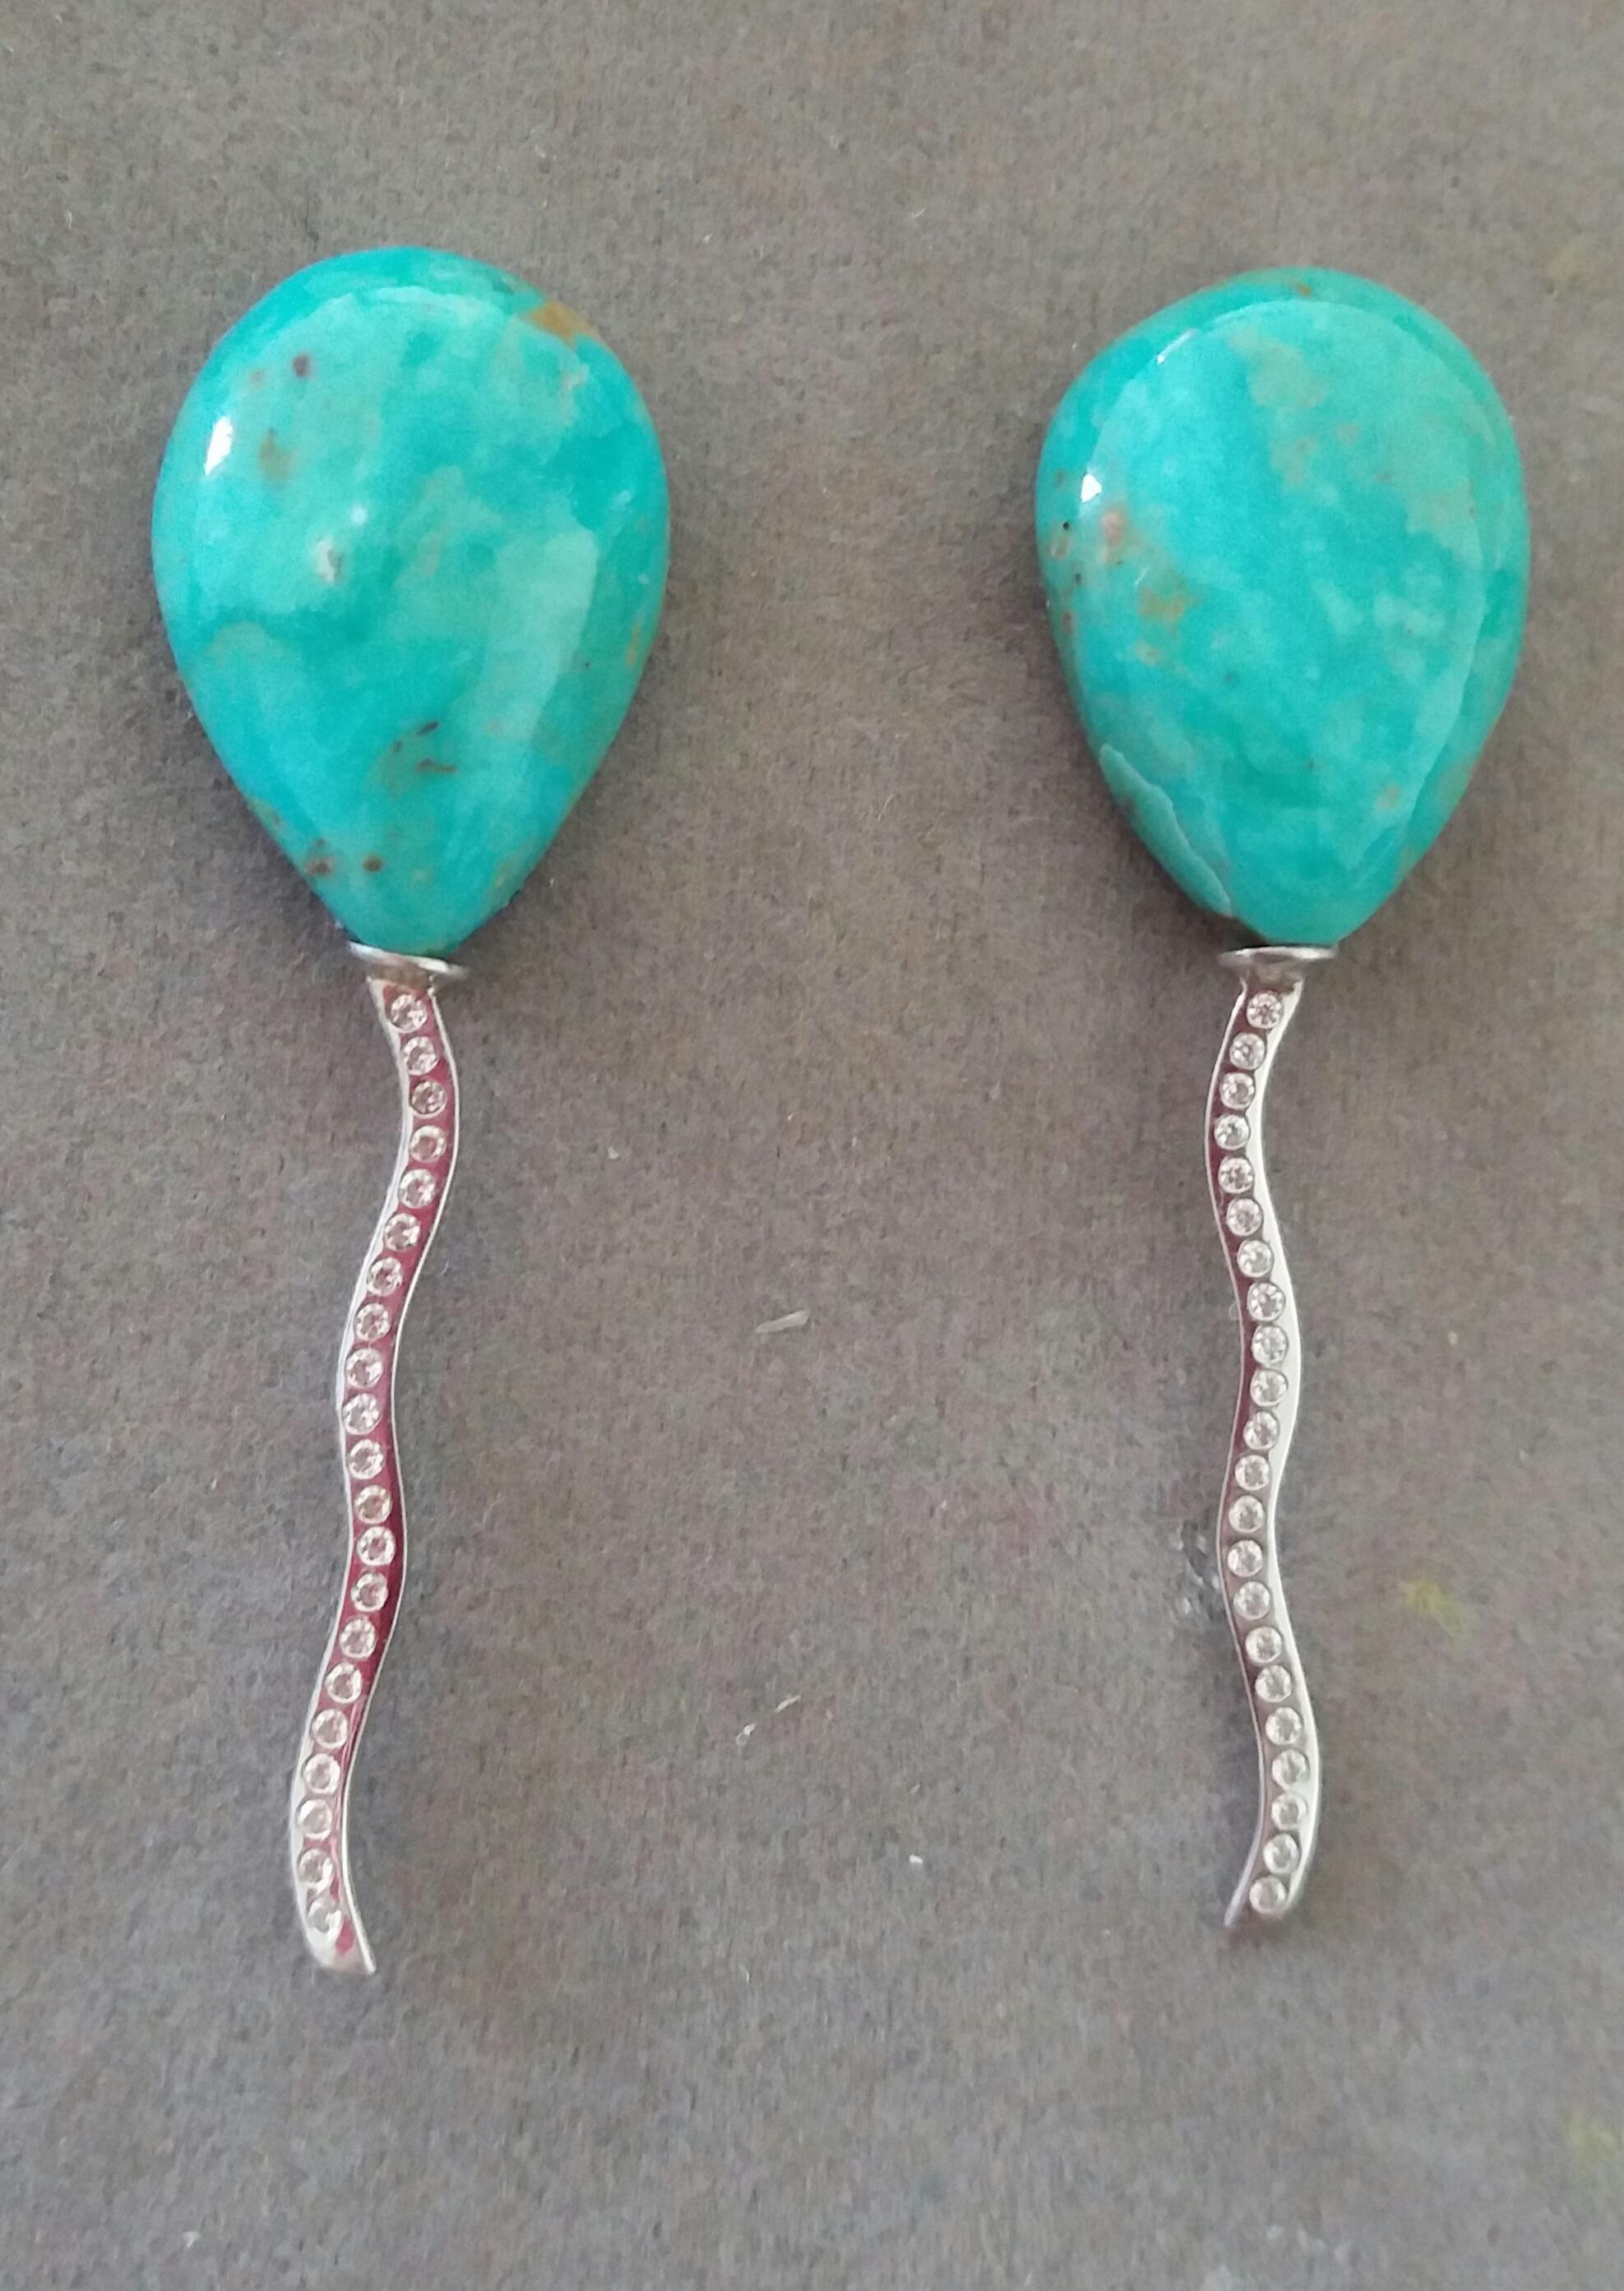 2 pear-shaped Natural Turquoise pear shape cabs measuring 15 x 21 mm. mounted like balloons with the thread holding them made of 14 carat White Gold and 44 small diamonds.

In 1978 our workshop started in Italy to make simple-chic Art Deco style